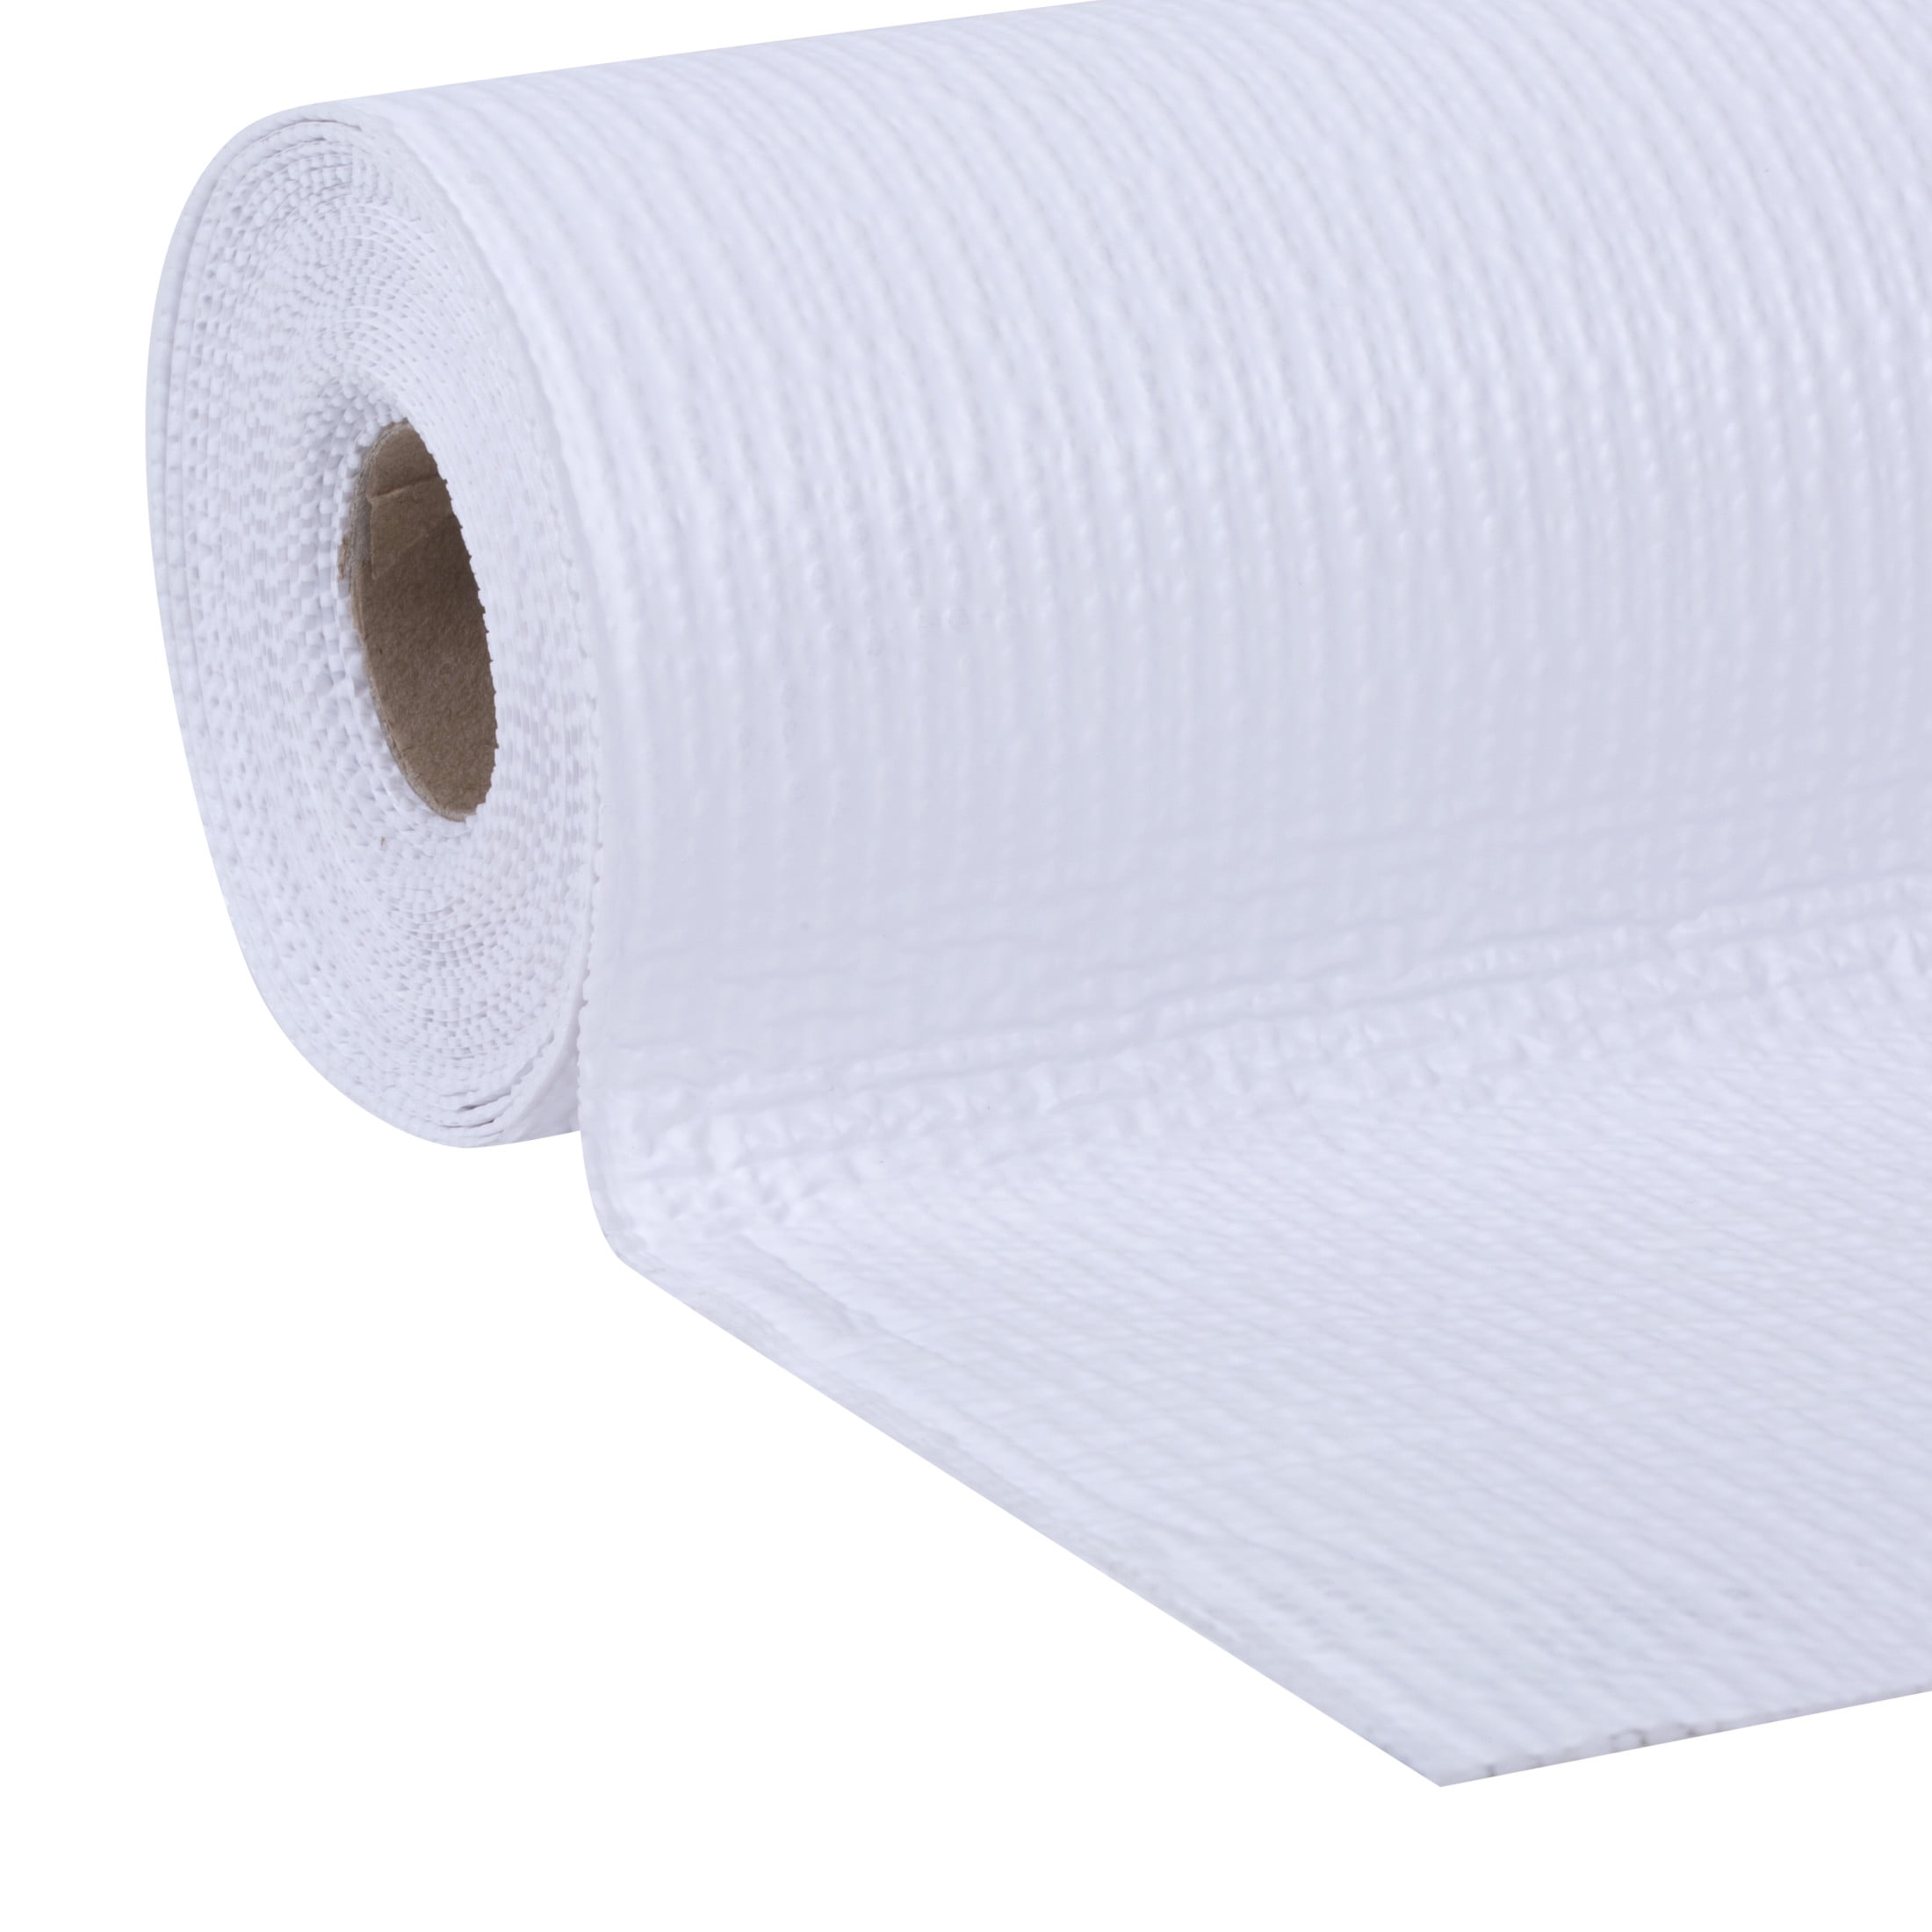 Grip-N-Stick Self-Adhesive Shelf Liner - White, 18 in x 4 ft